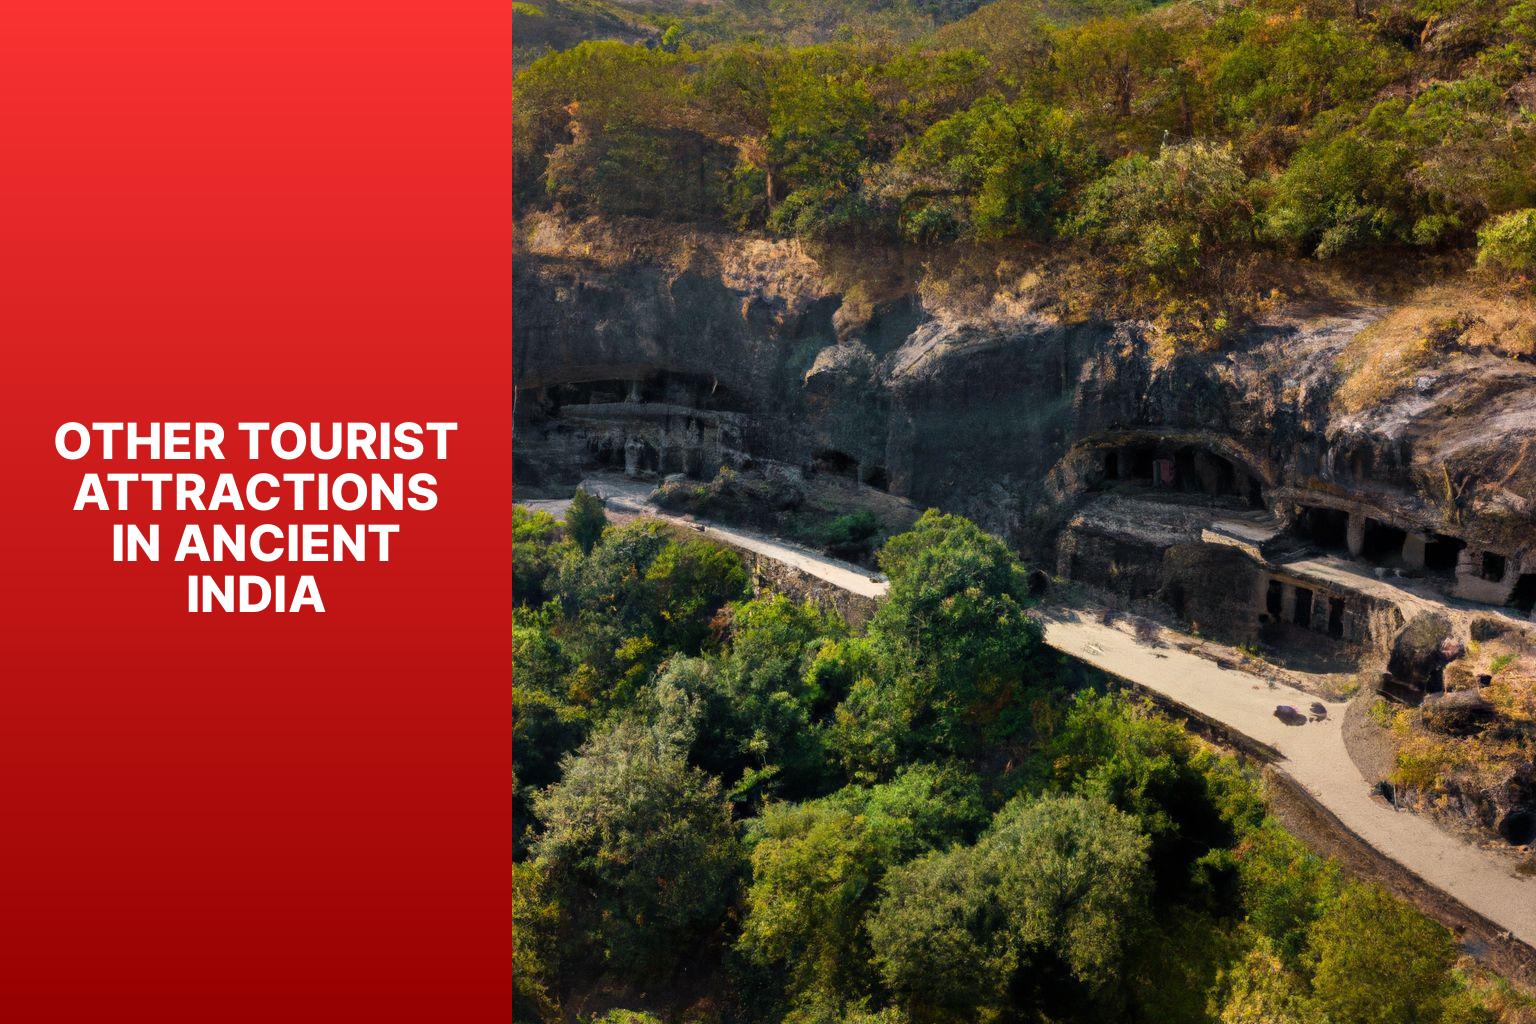 Other Tourist Attractions in Ancient India - The Growth of Tourism in Ancient India: Pilgrimage Sites and Beyond 